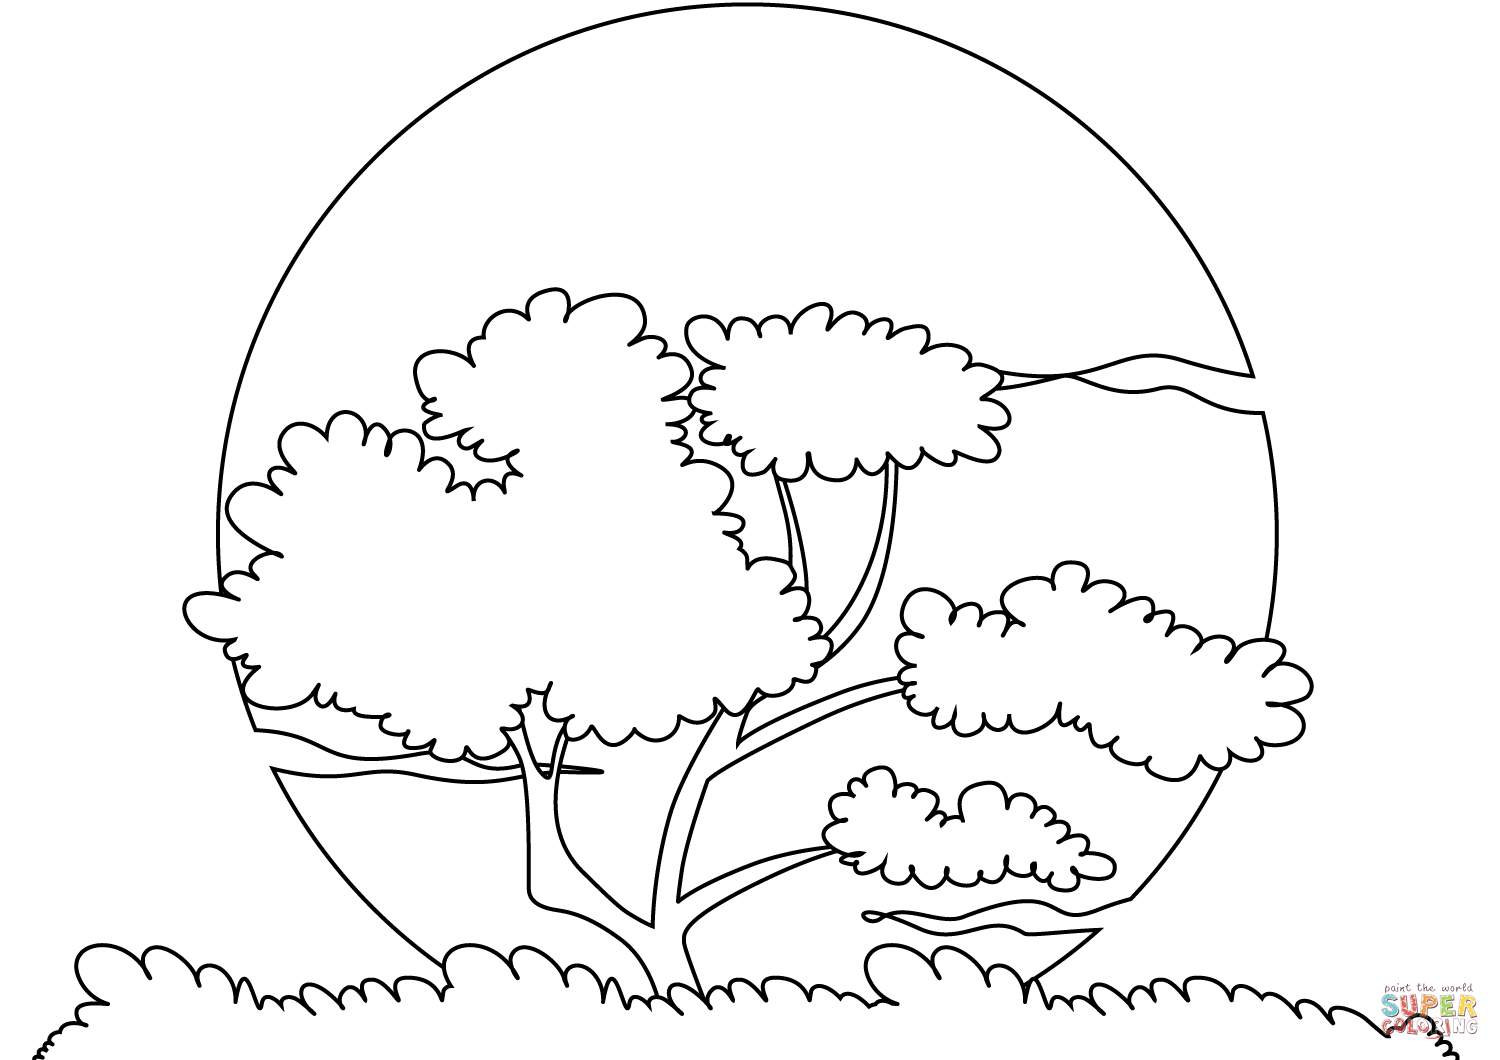 South Park Coloring Page Sunset Sun Coloring Page Free Printable Coloring Pages